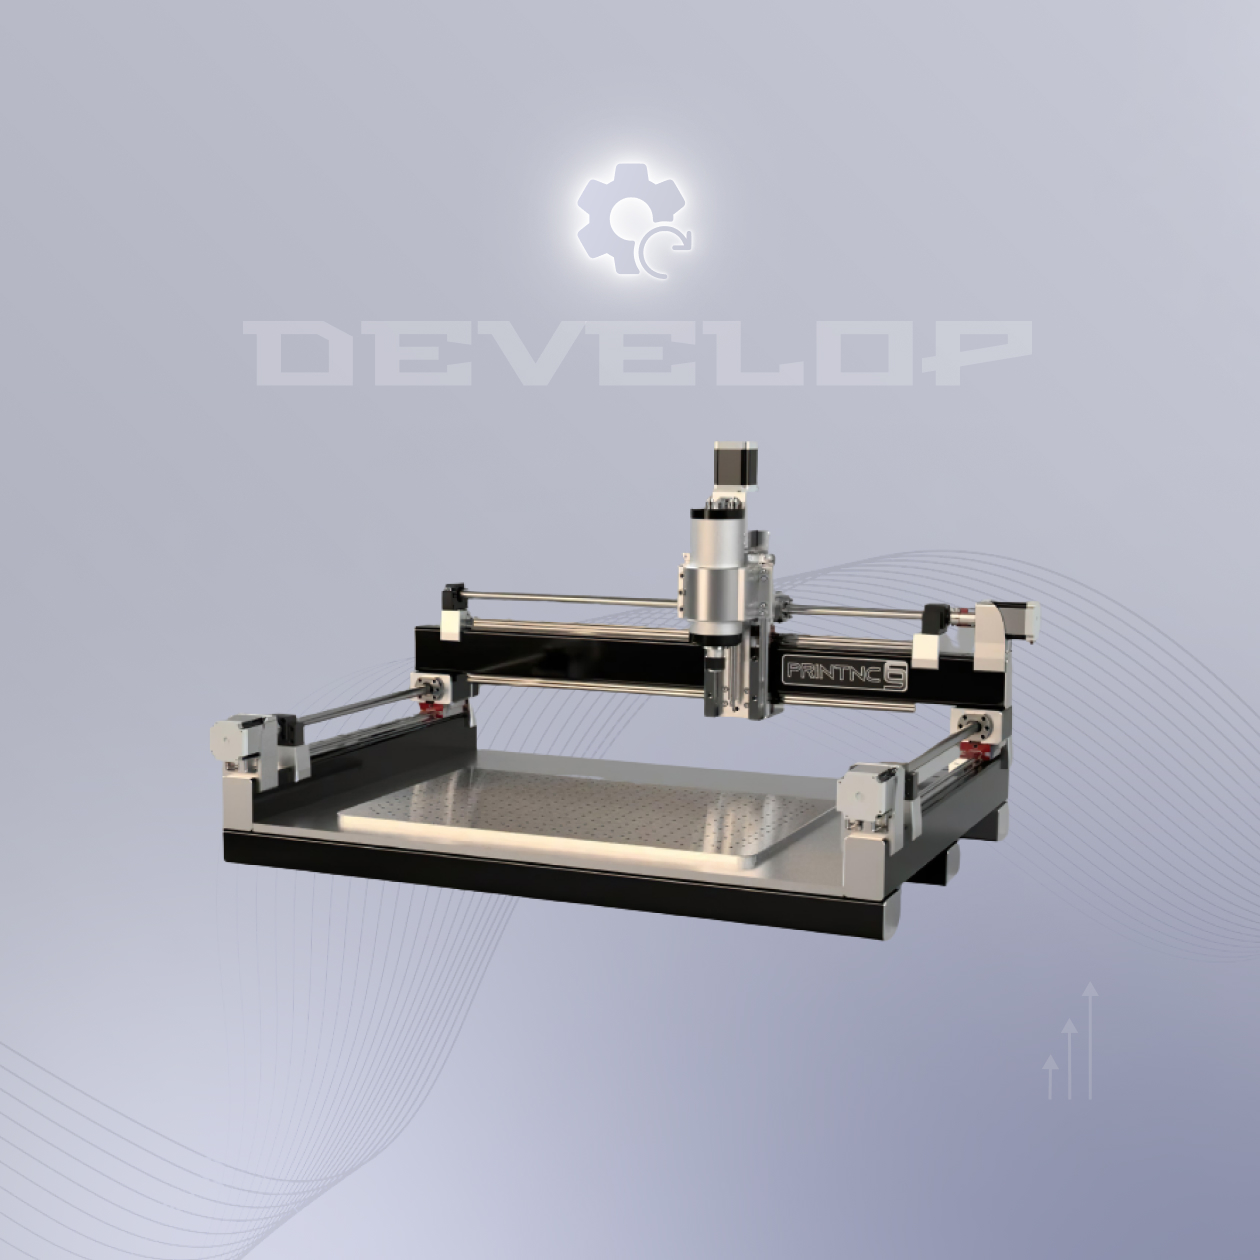 With help of mechanical engineering, 3D printing, electrical engineering, our company has made own CNC Milling Machine. The development of 2022.